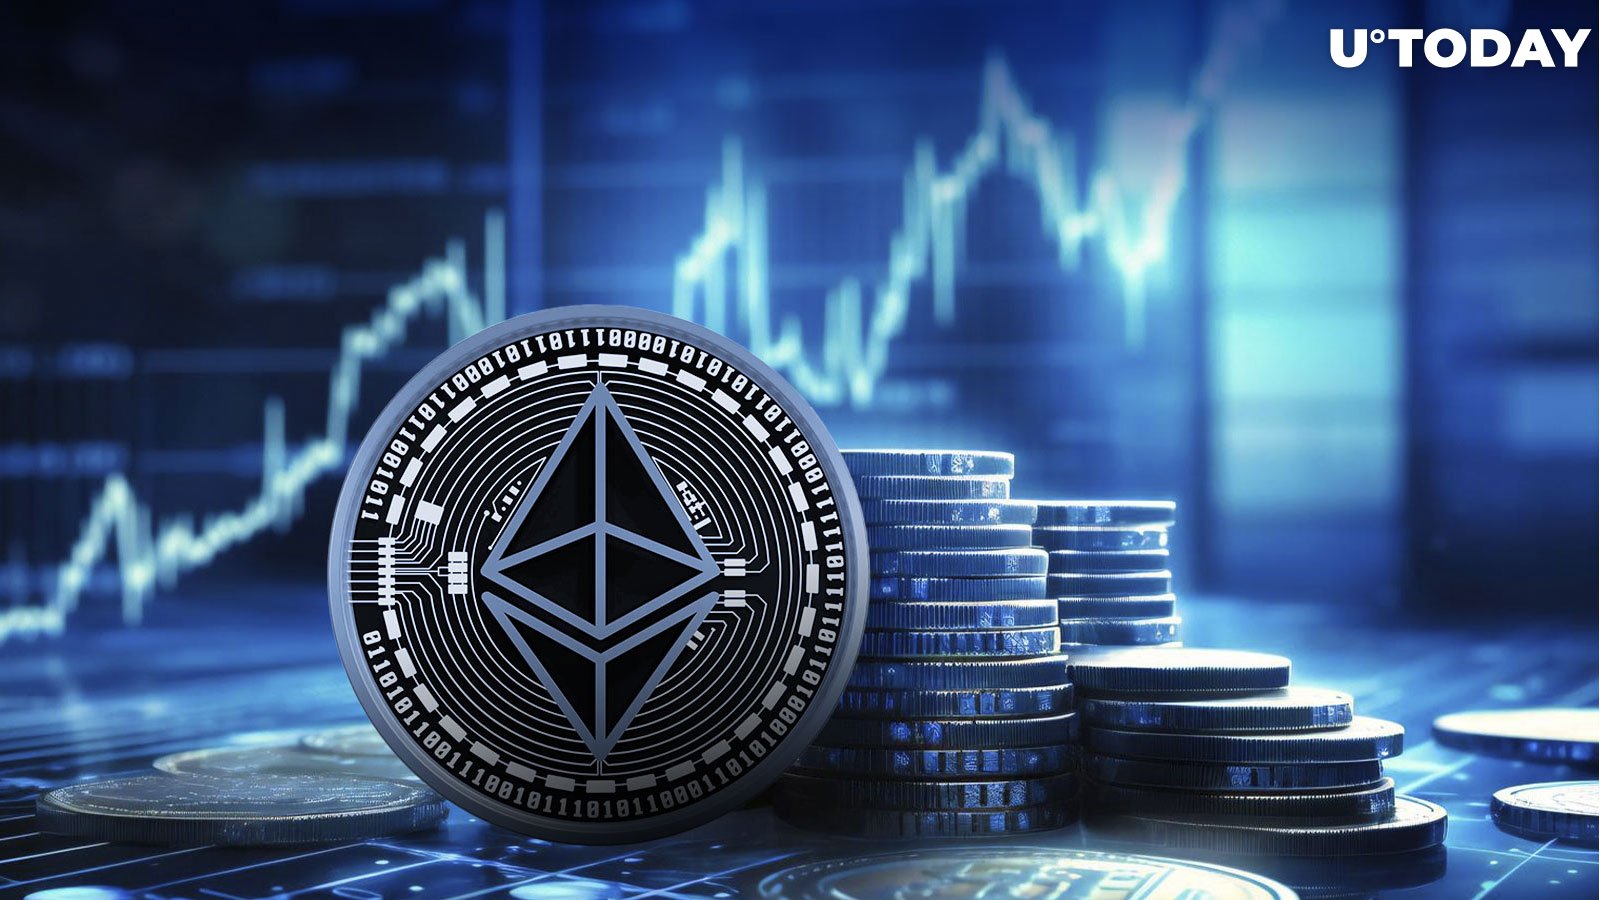 Ethereum (ETH) Soars to $2,400, Institutional FOMO Yet to Kick In - What's Next?